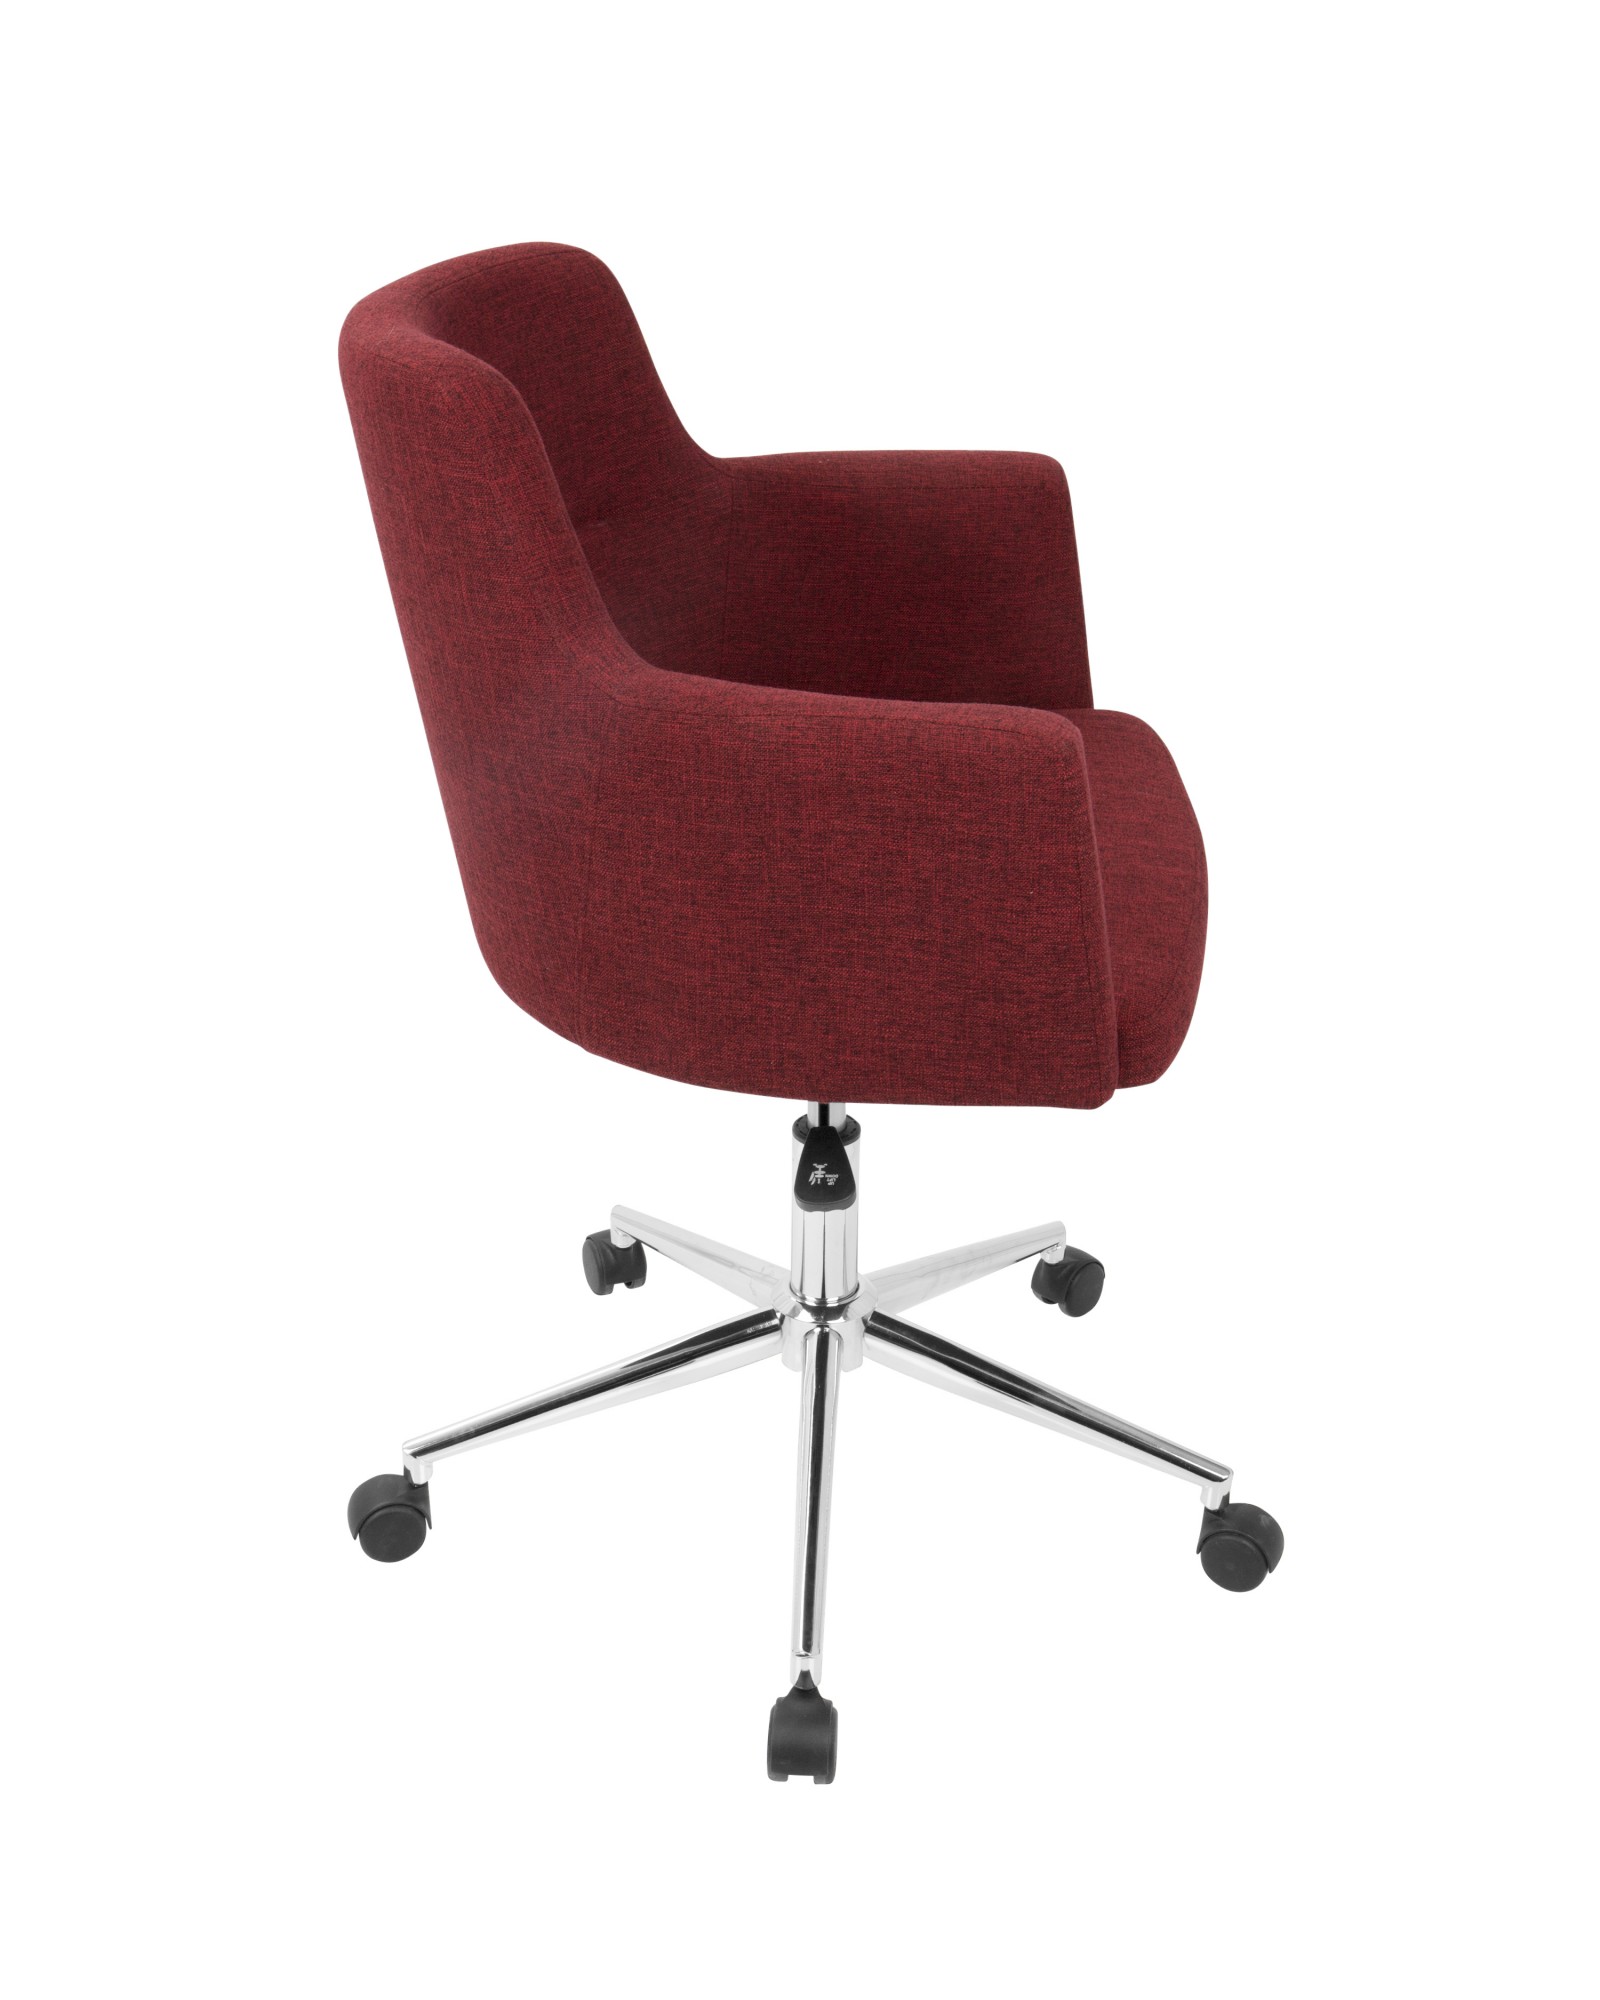 Andrew Contemporary Adjustable Office Chair in Red